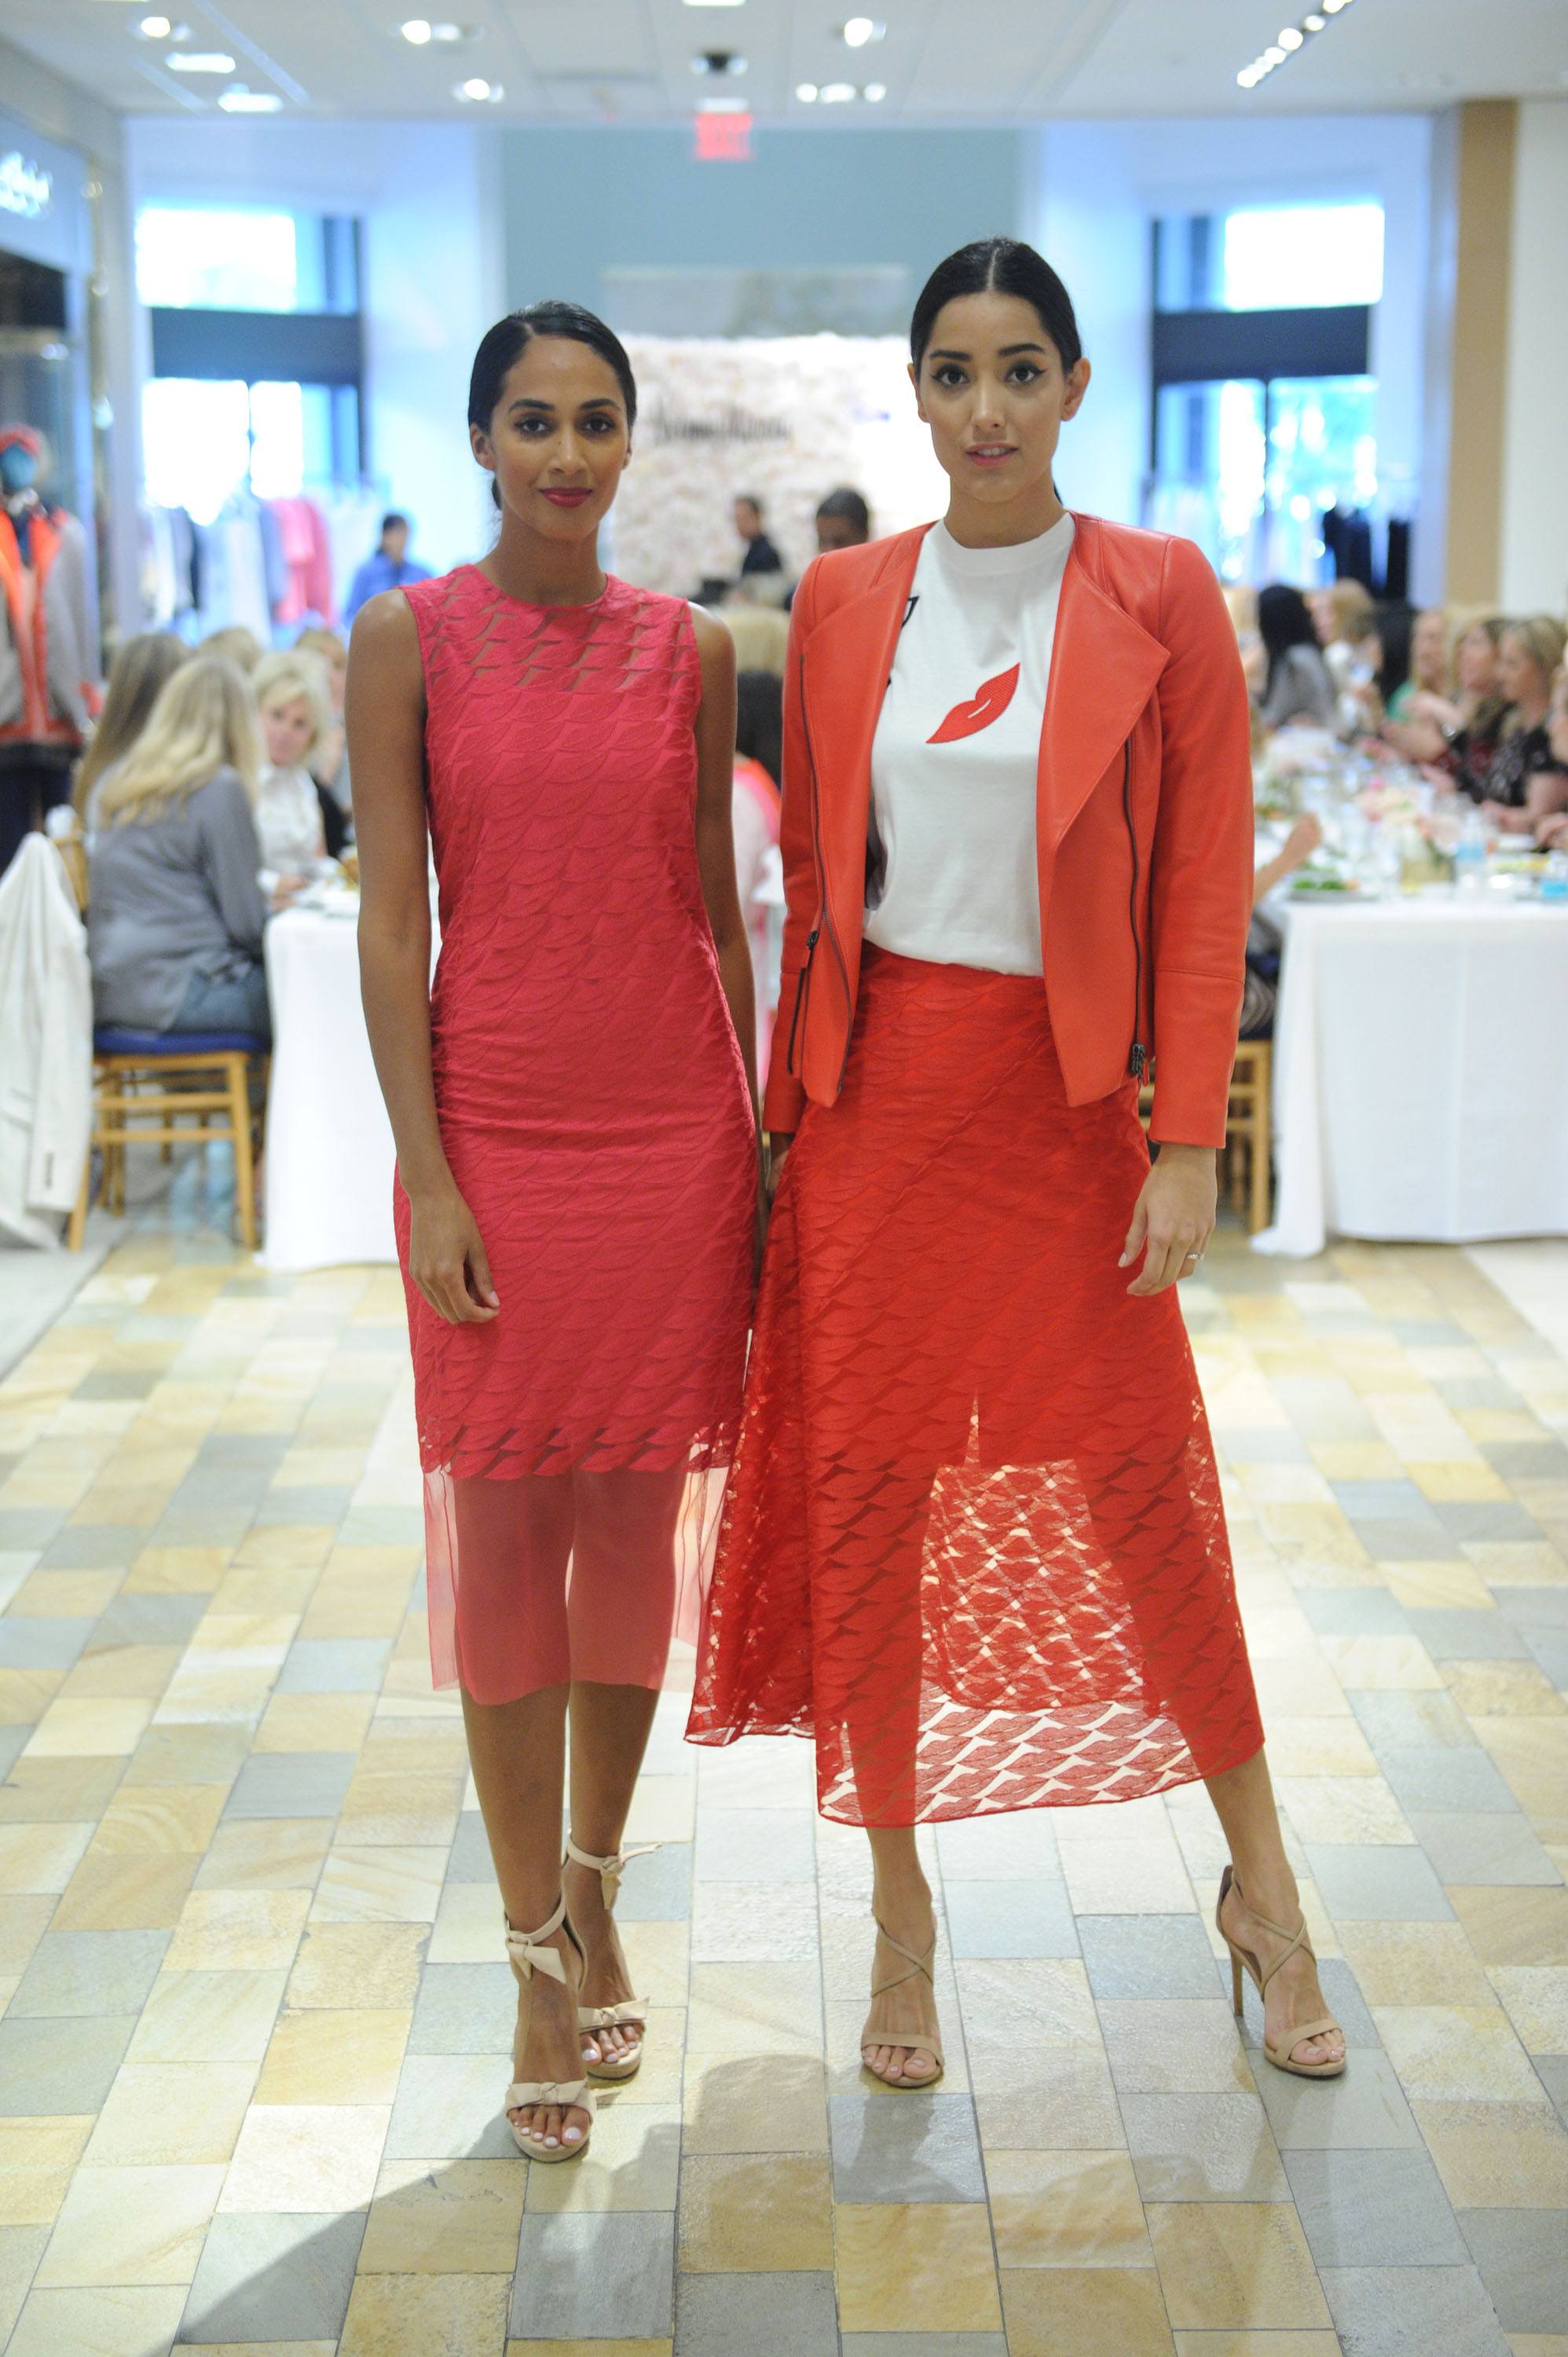 Models in Neiman Marcus Resort/Spring 2019 collection greet guests at luncheon